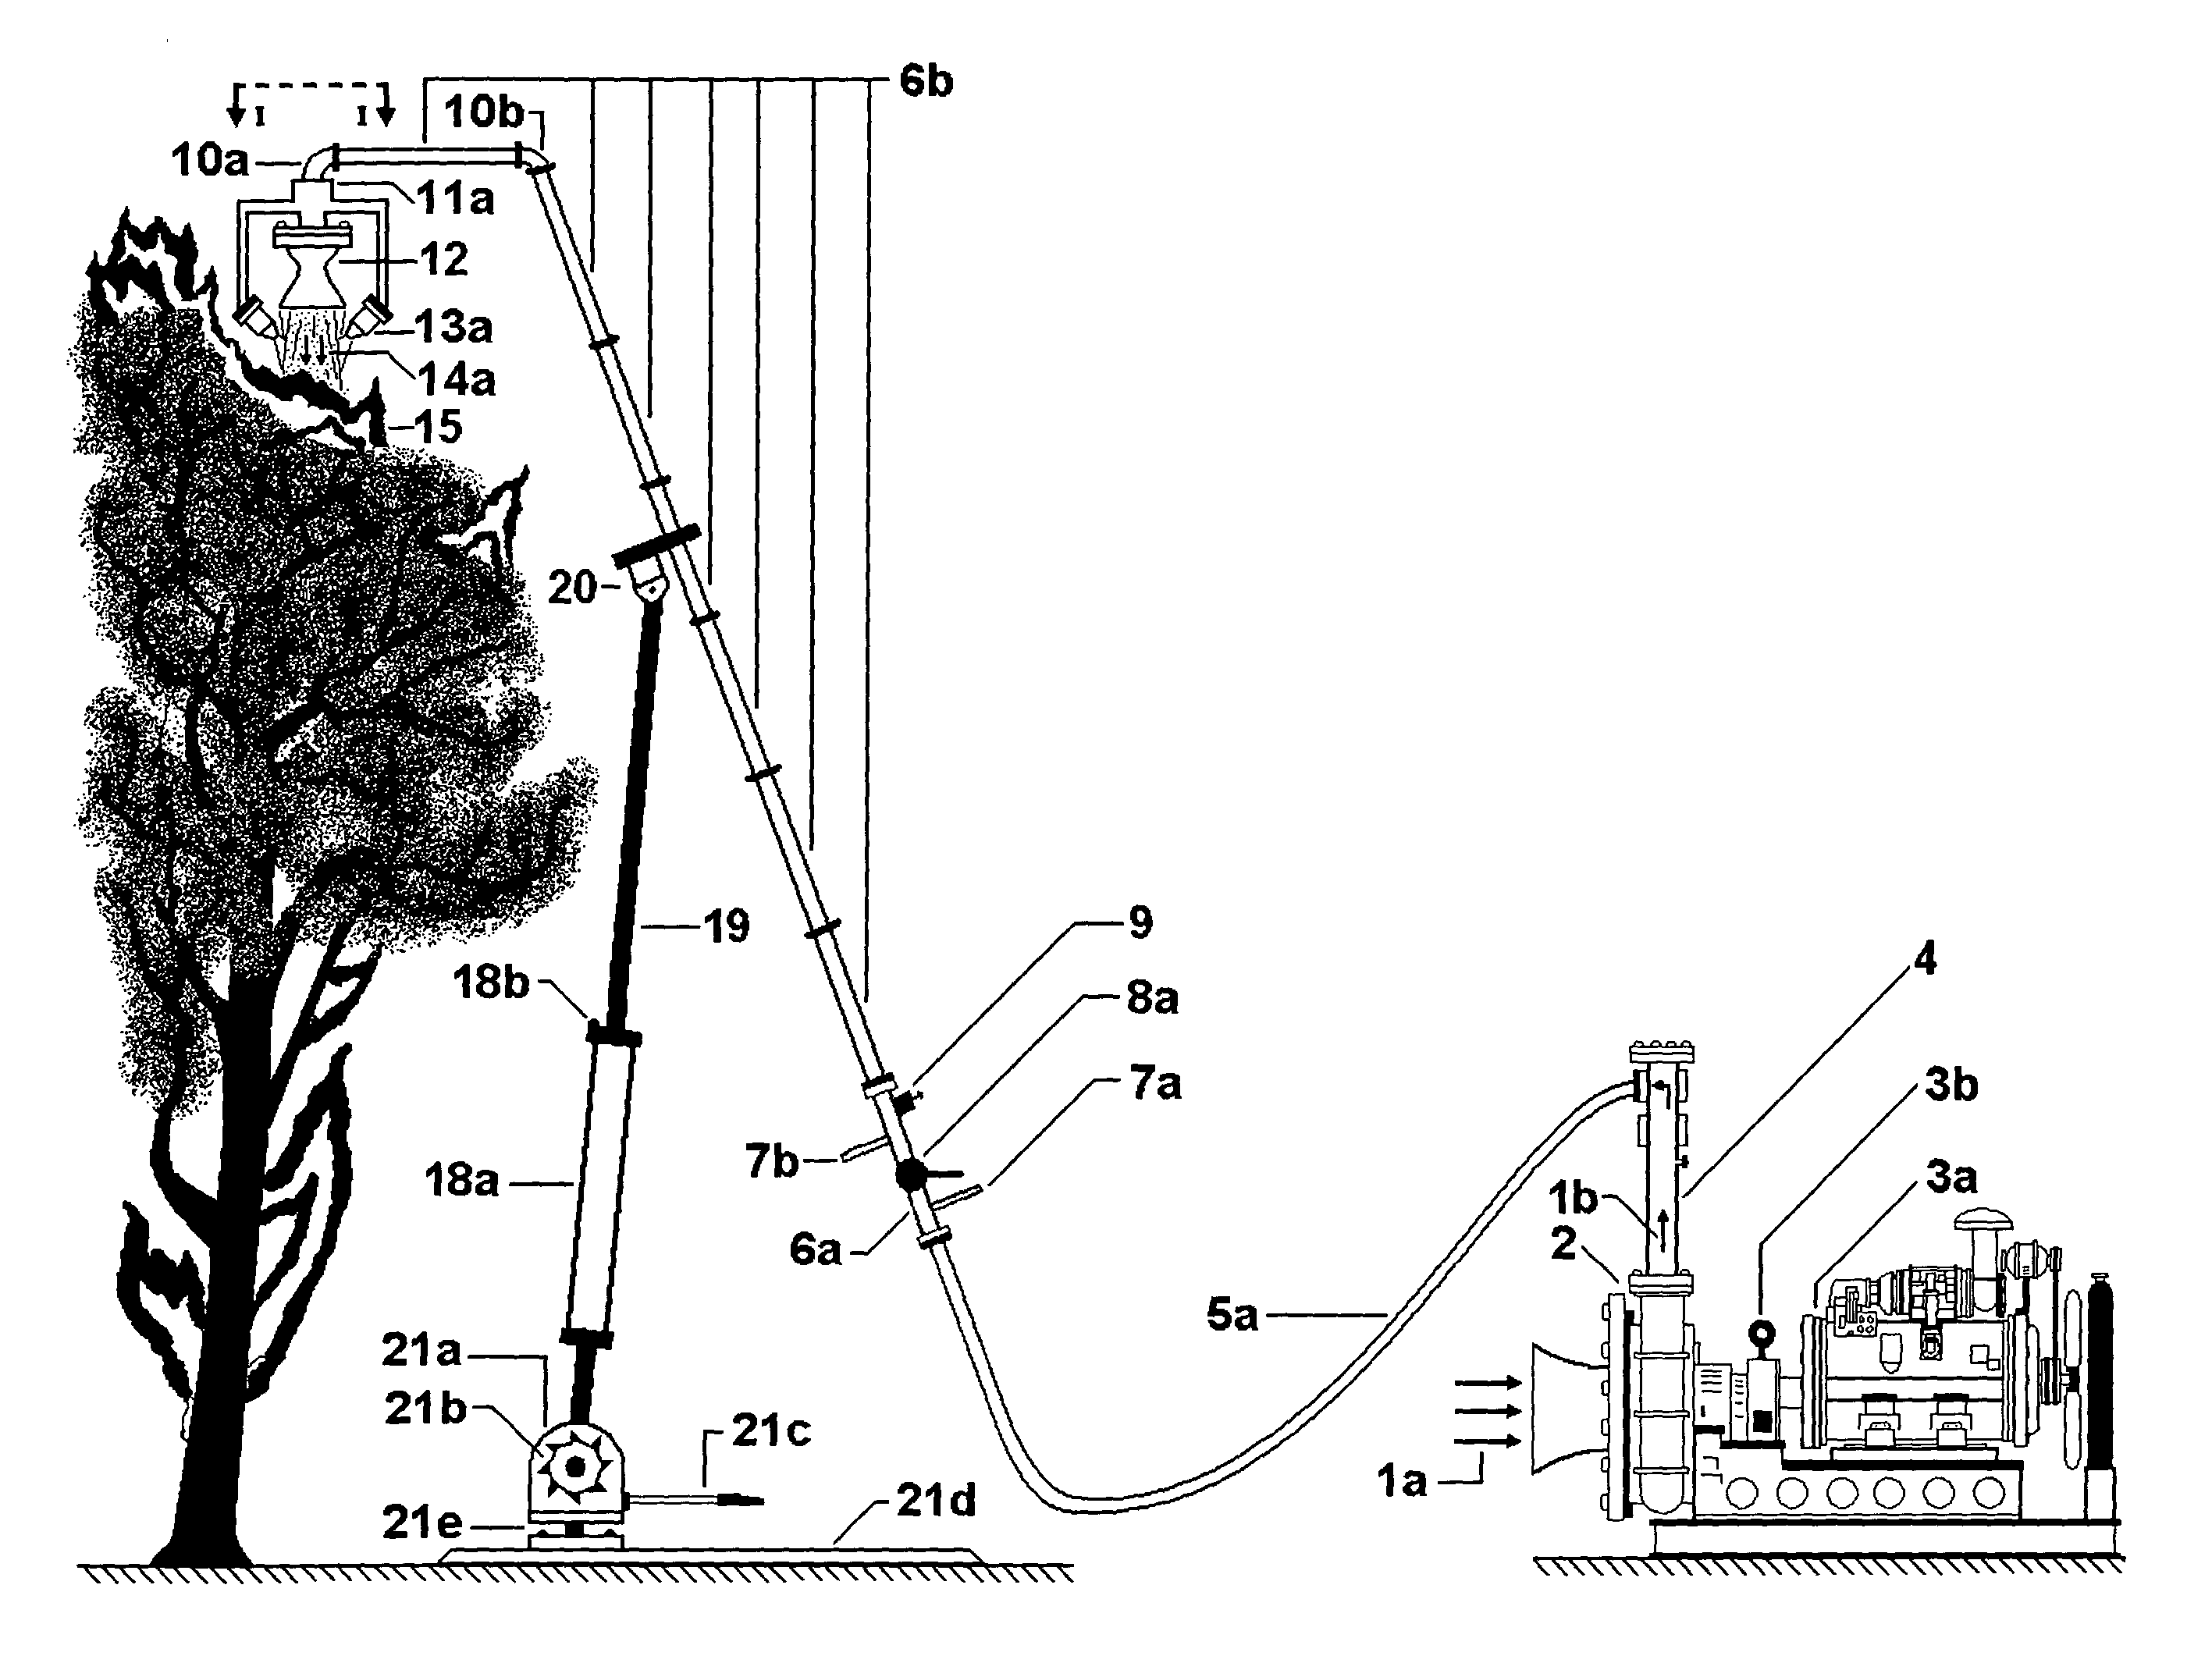 Ambient-air jet blast flames containment and suppression system